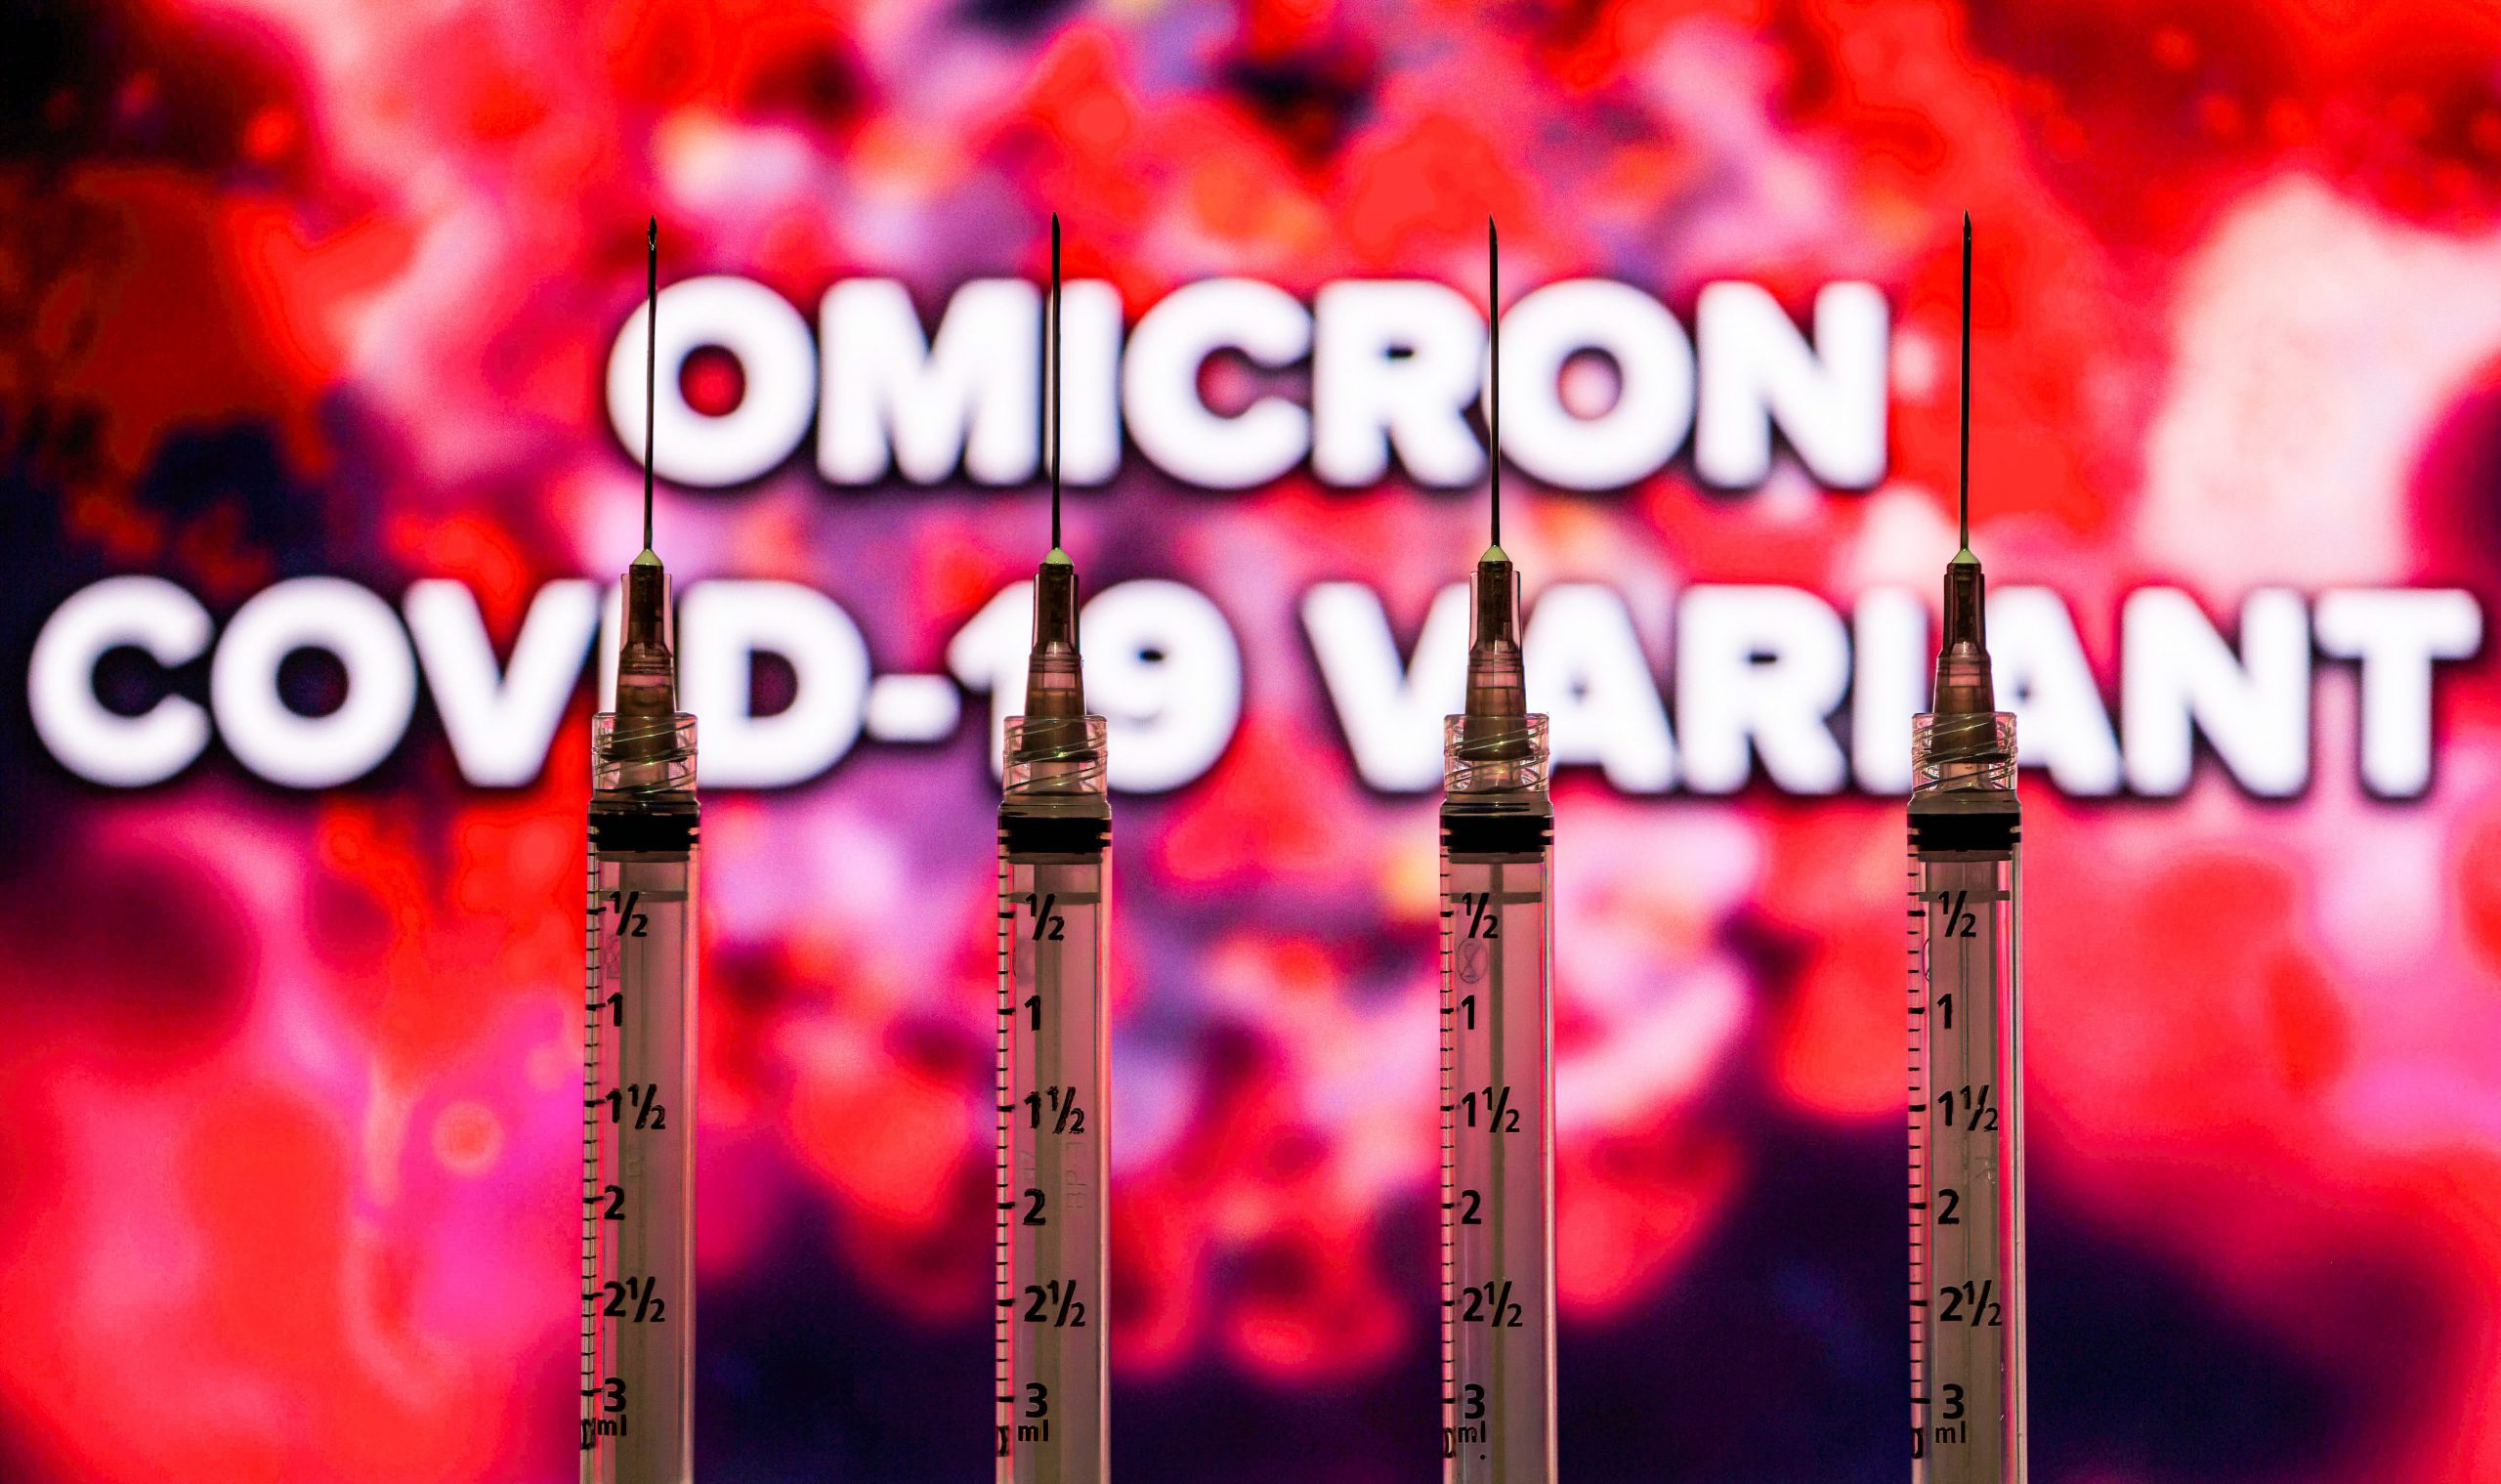 Spain reports its first Omicron COVID-19 case caused by community transmission